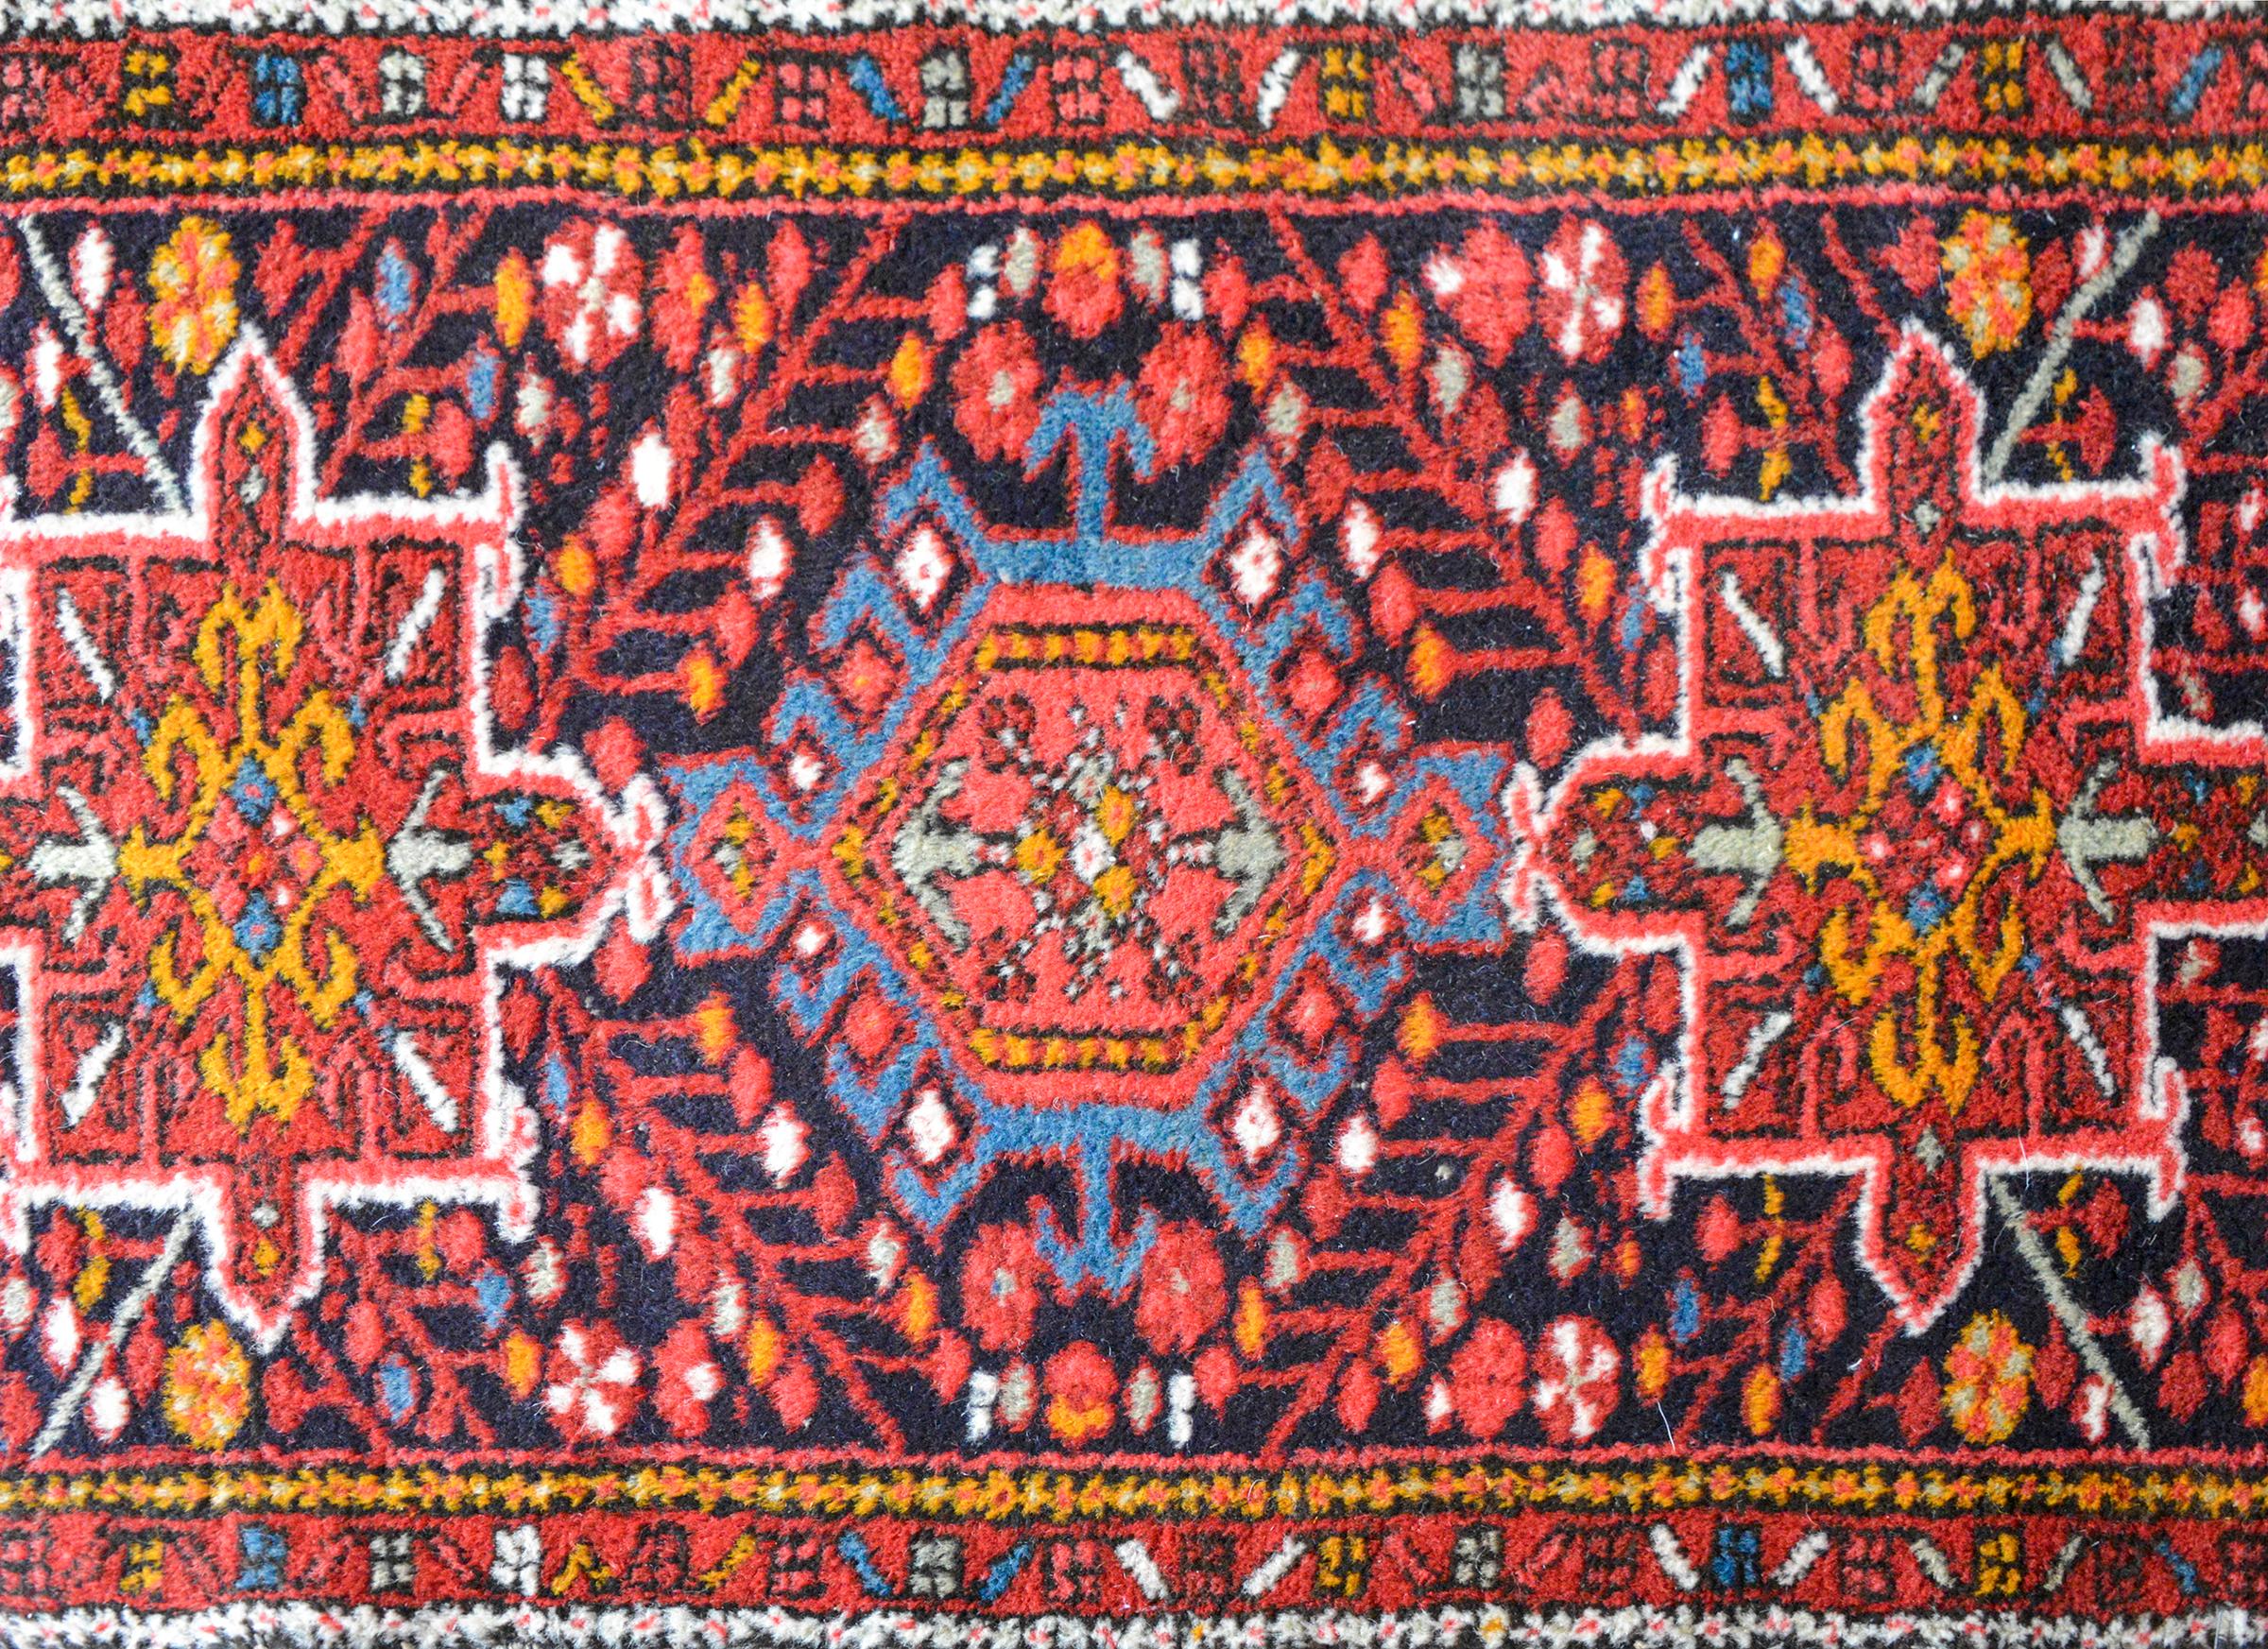 A vintage petite Persian Karadja rug with three stylized floral medallions woven in red, orange, white, and light indigo, against a crimson black background and surrounded by multiple thin floral partnered stripes.

